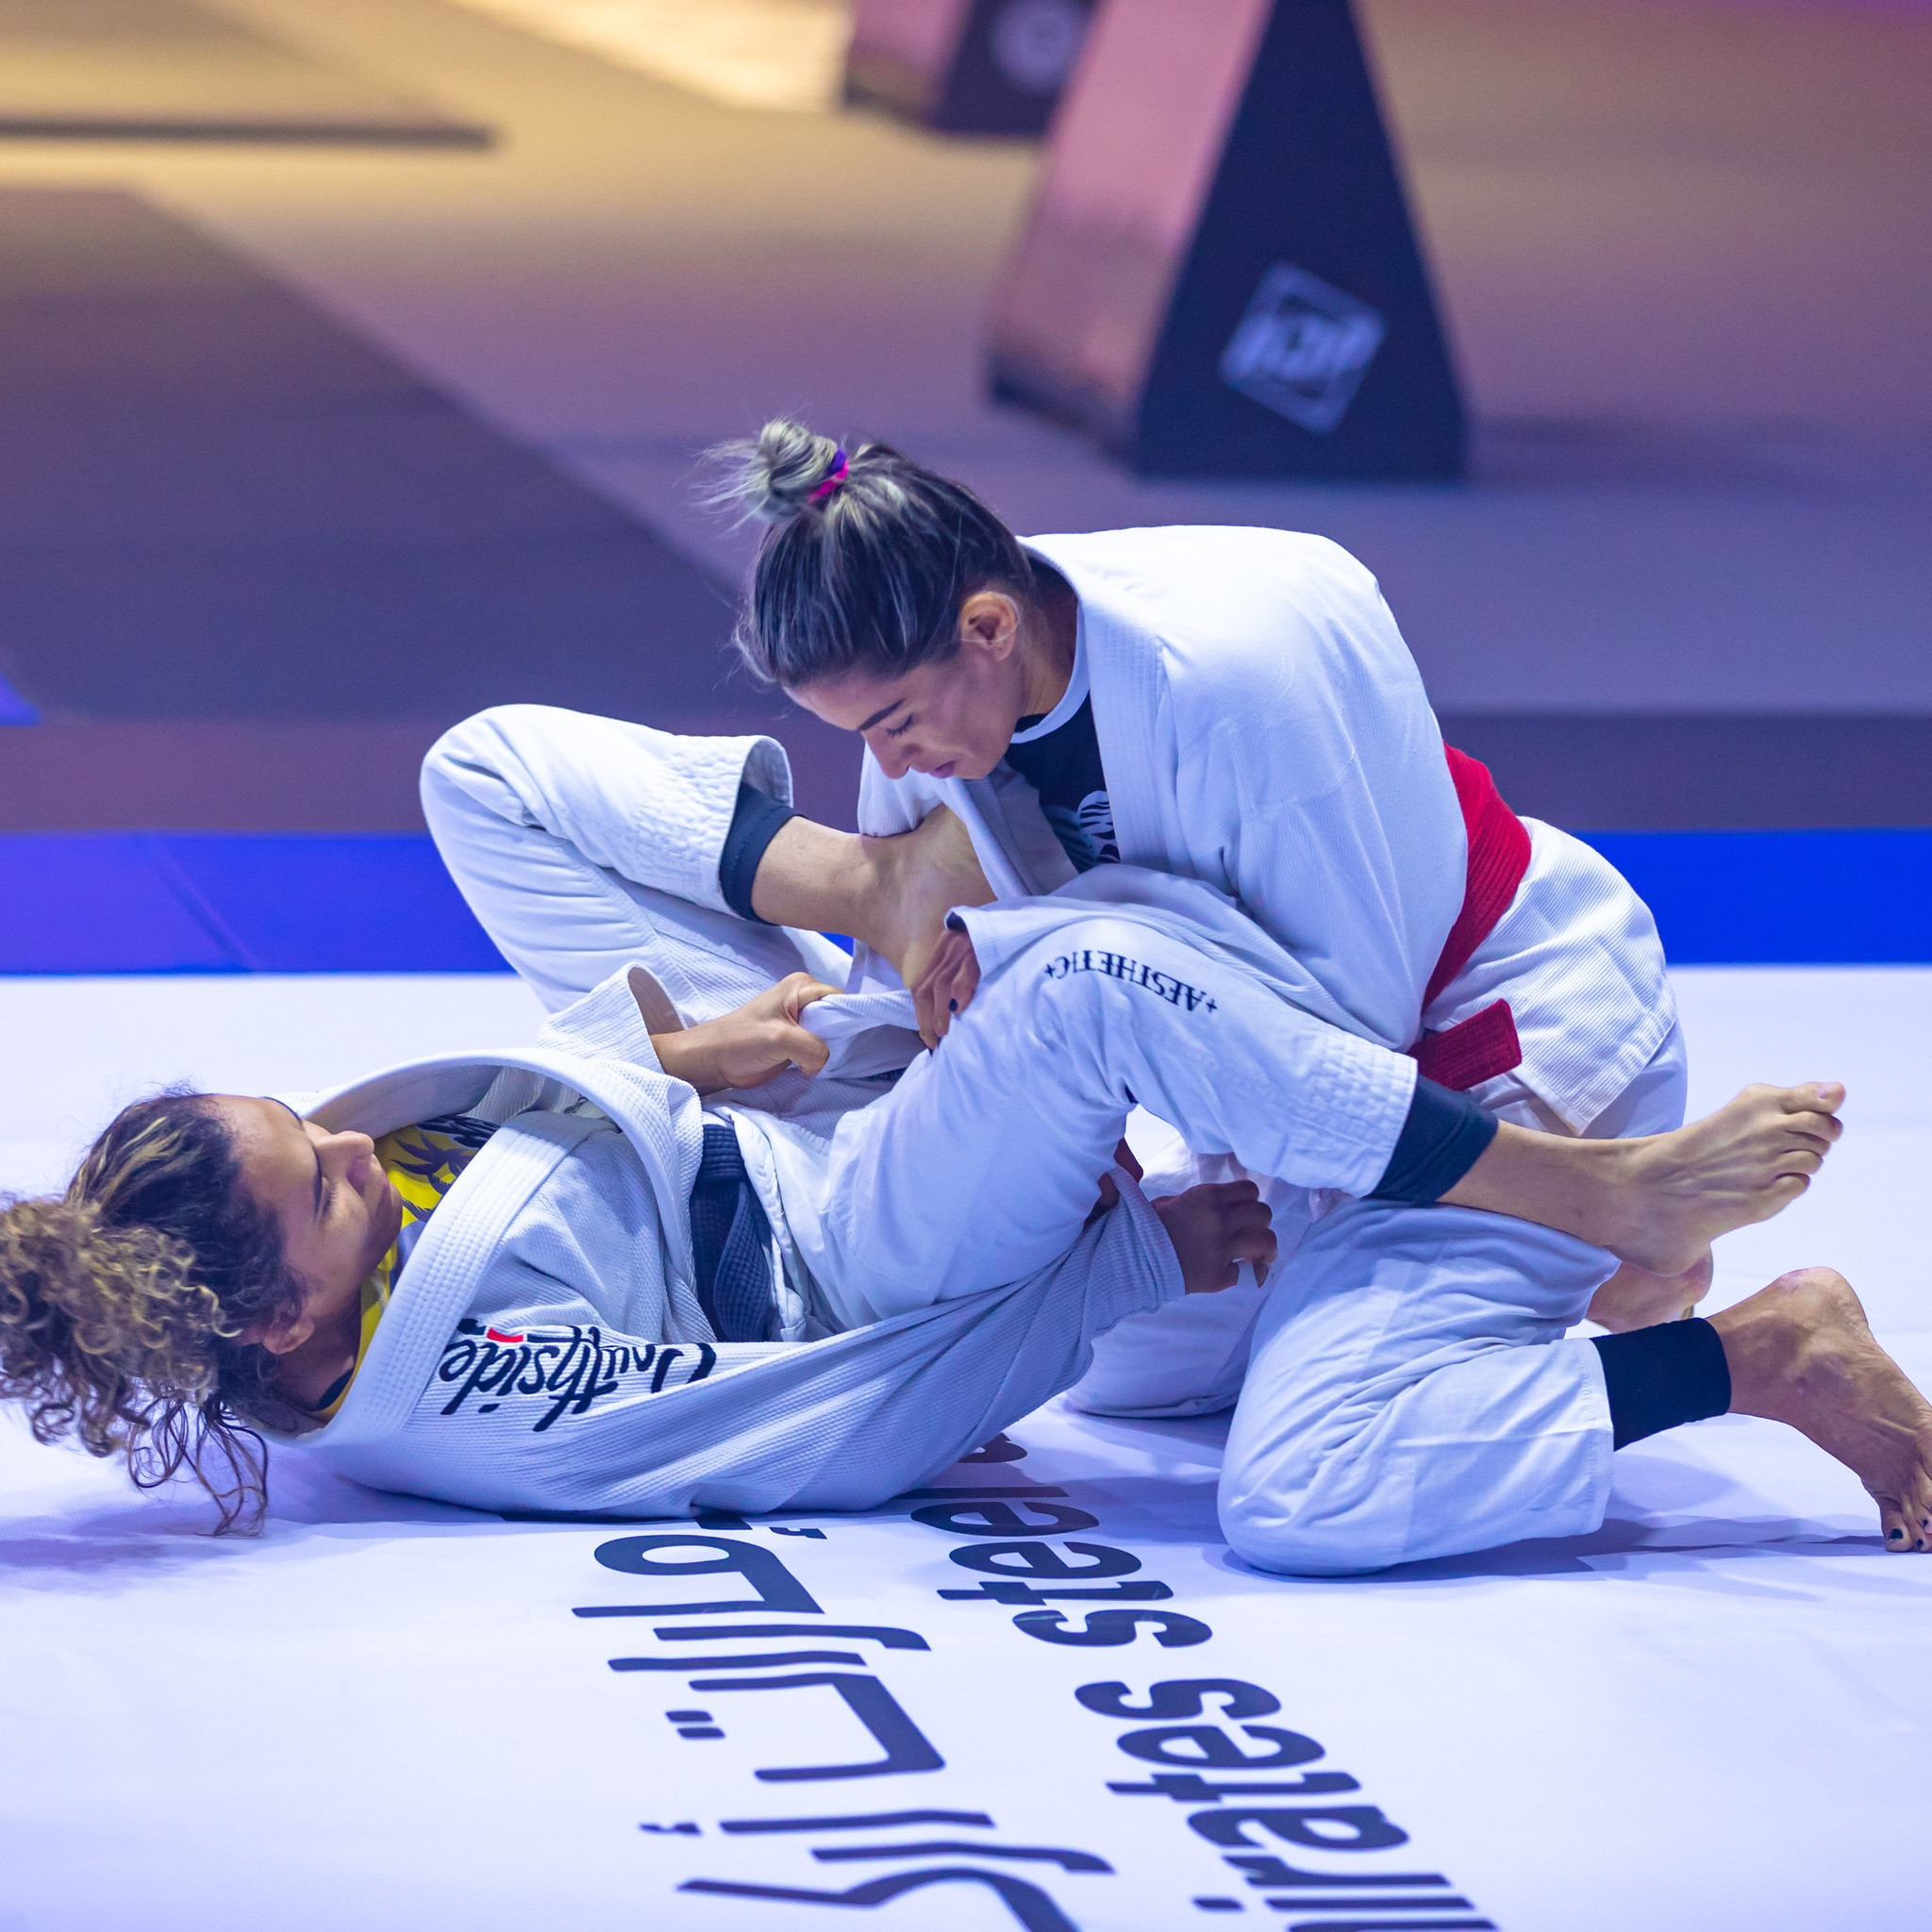 The United Arab Emirates jiu-jitsu women’s national team are aiming for medal success at this year's Asian Games in Hangzhou ©UAEJJF